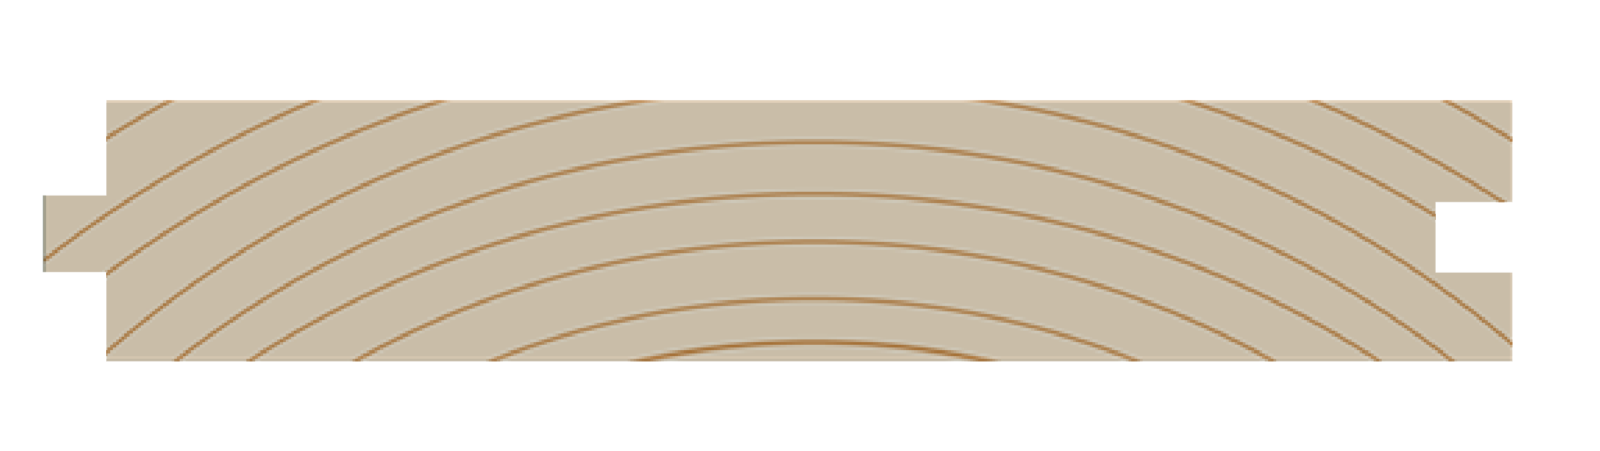 Illustration showing profile of Tongue & Groove Reclaimed plank